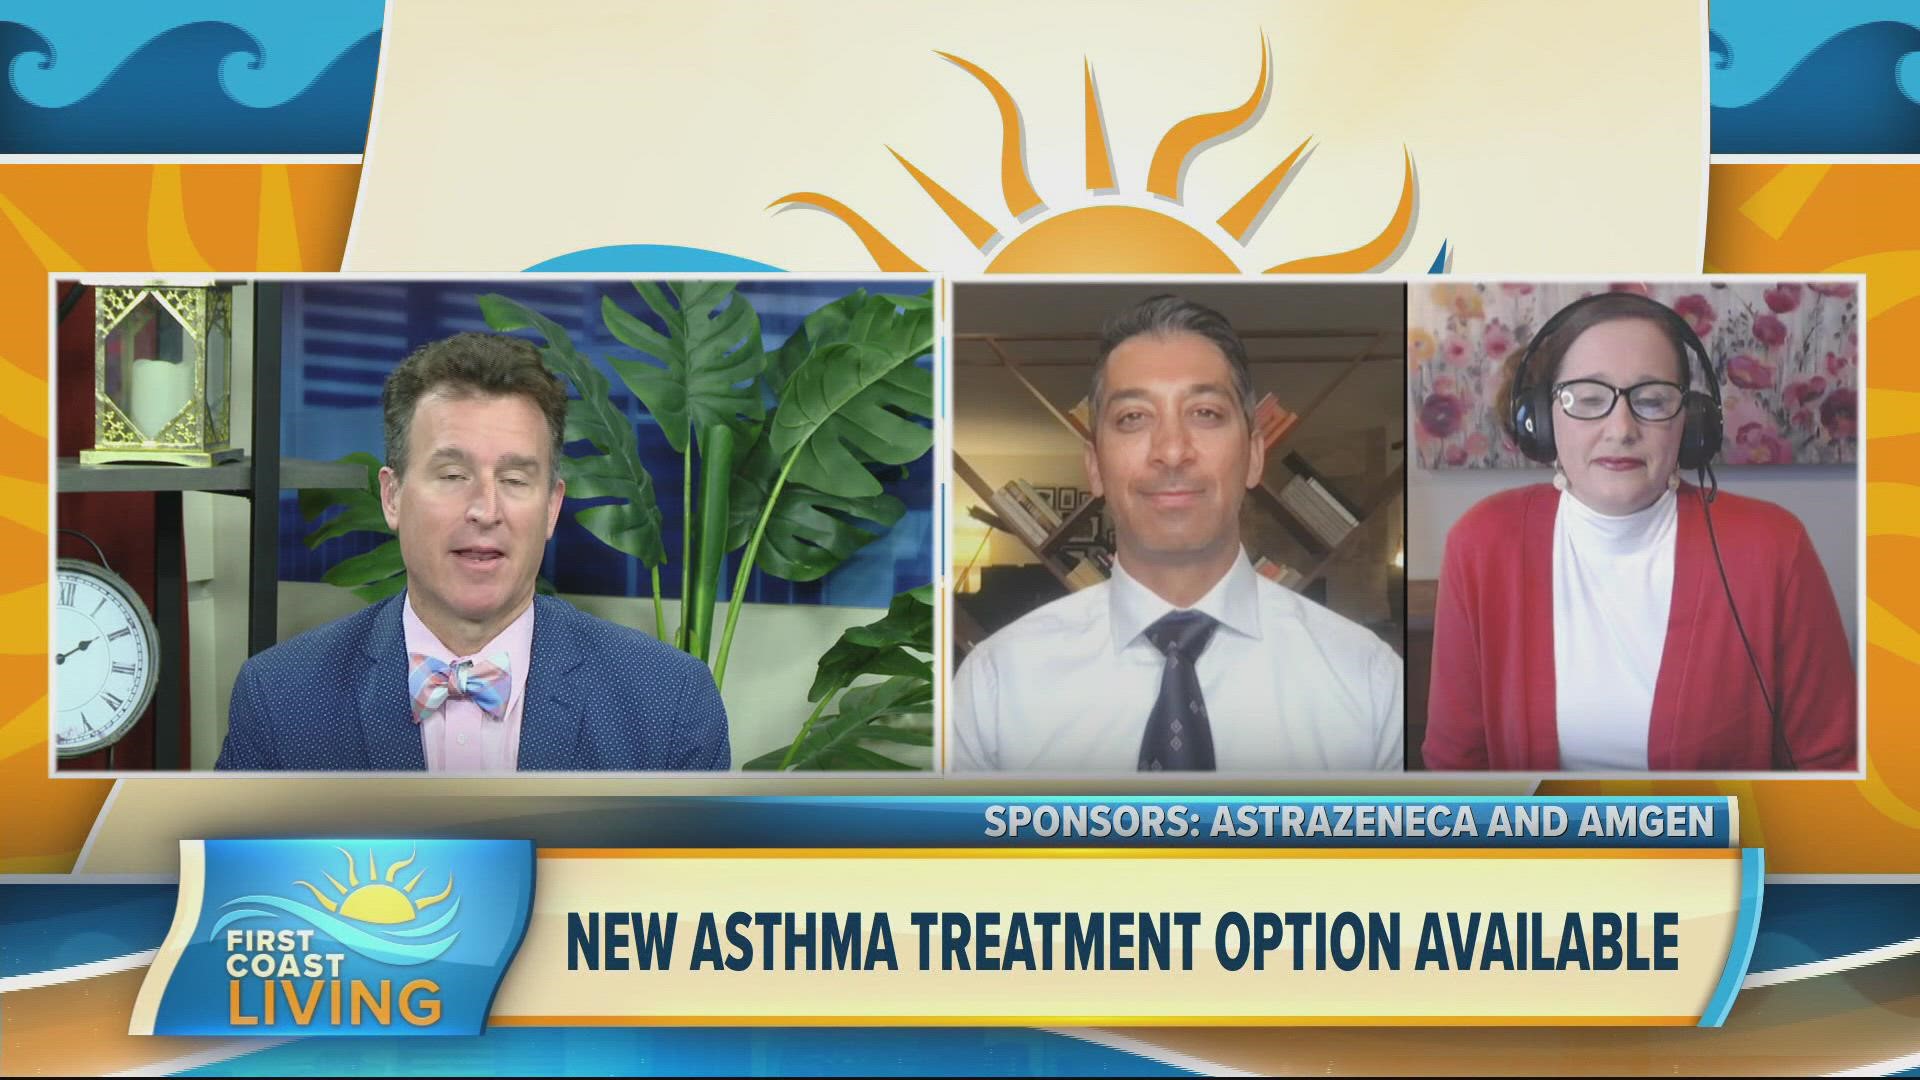 Tezspire now offers a new treatment option for individuals living with severe asthma to potentially get the treatment they need.